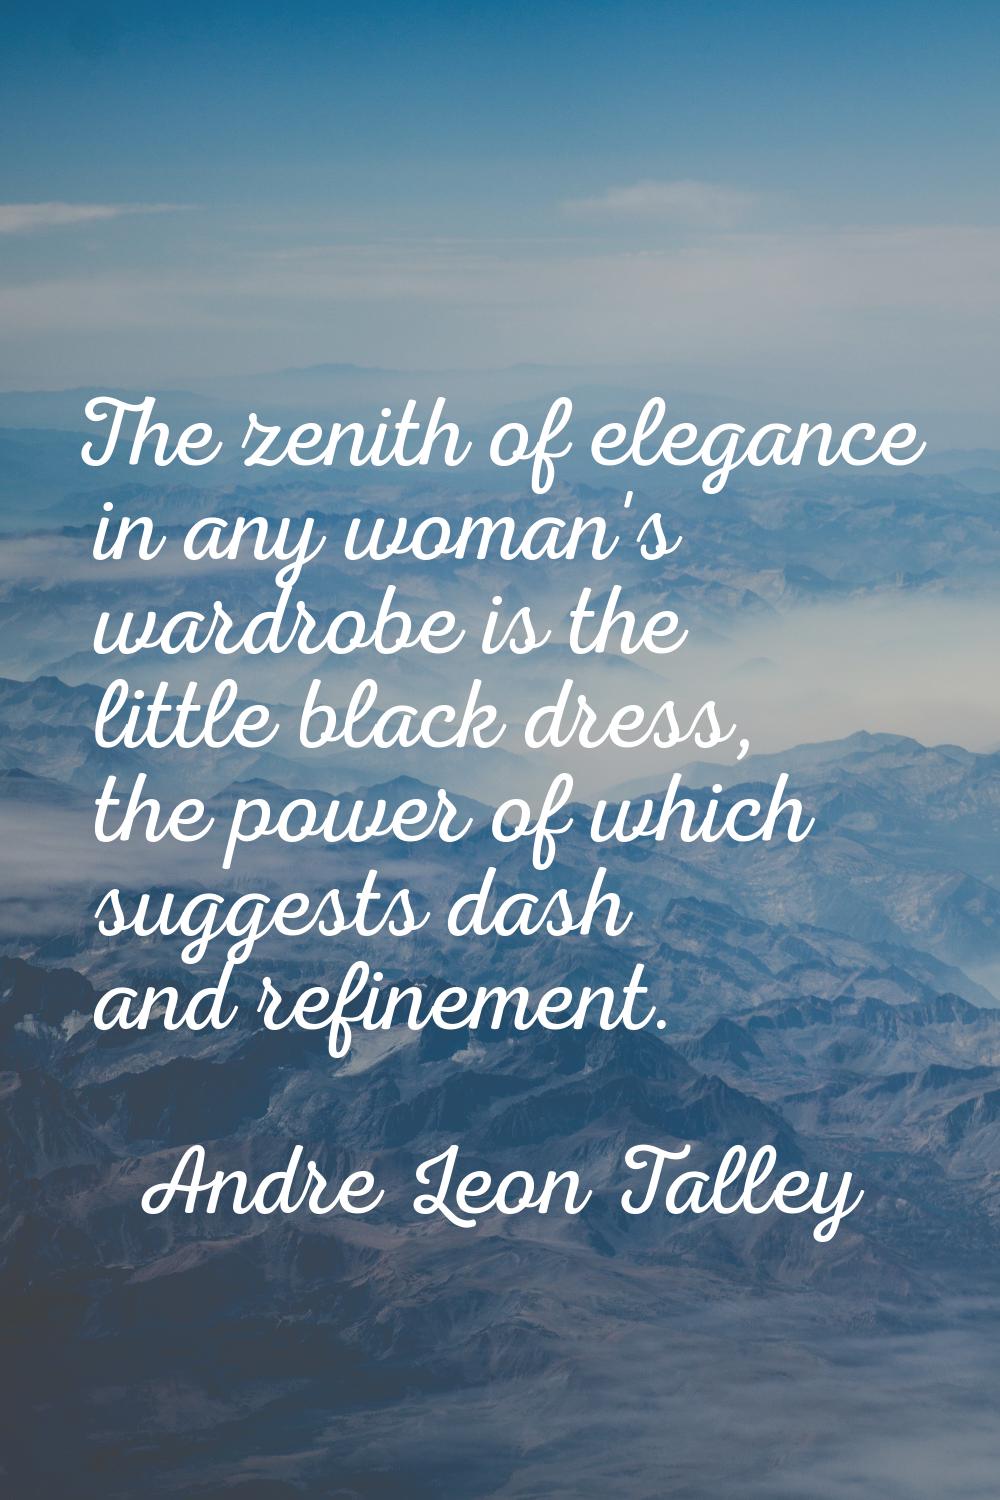 The zenith of elegance in any woman's wardrobe is the little black dress, the power of which sugges